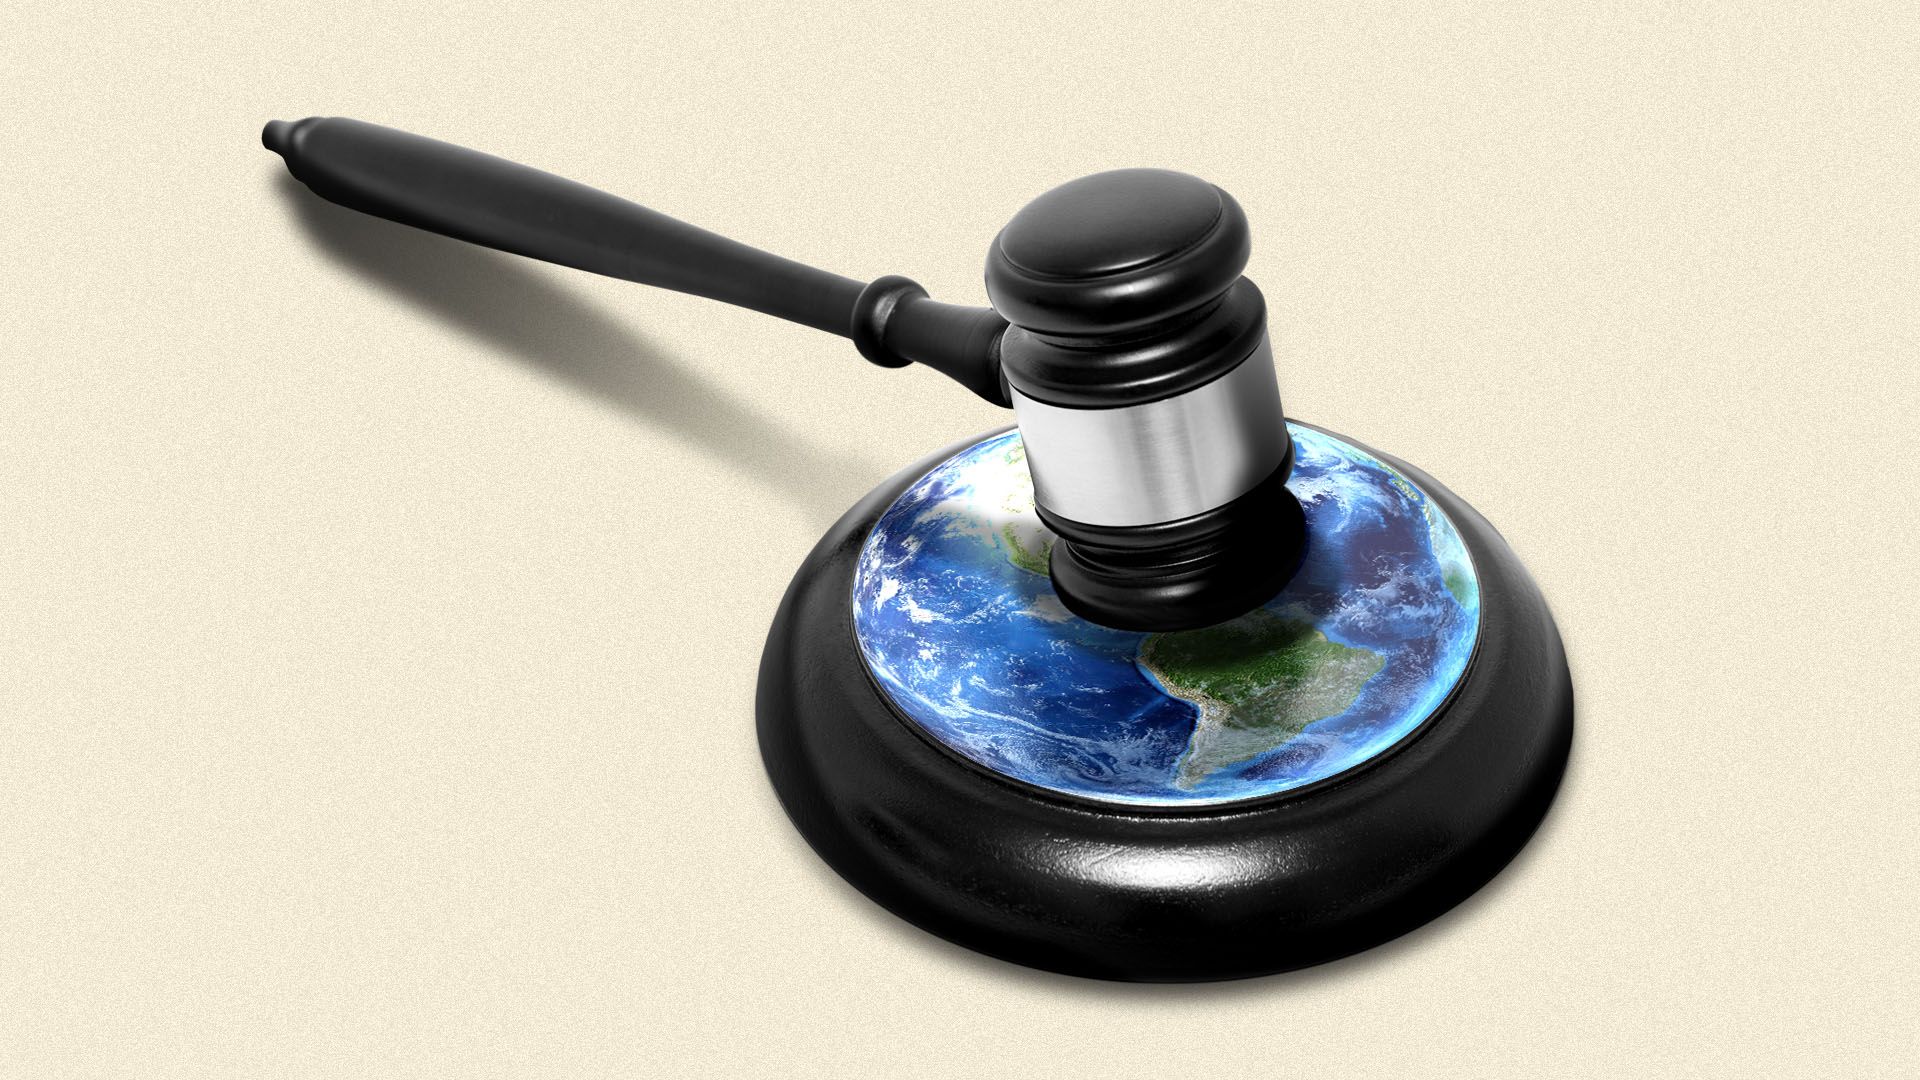 Illustration of a gavel and sound block with an image of the earth on it